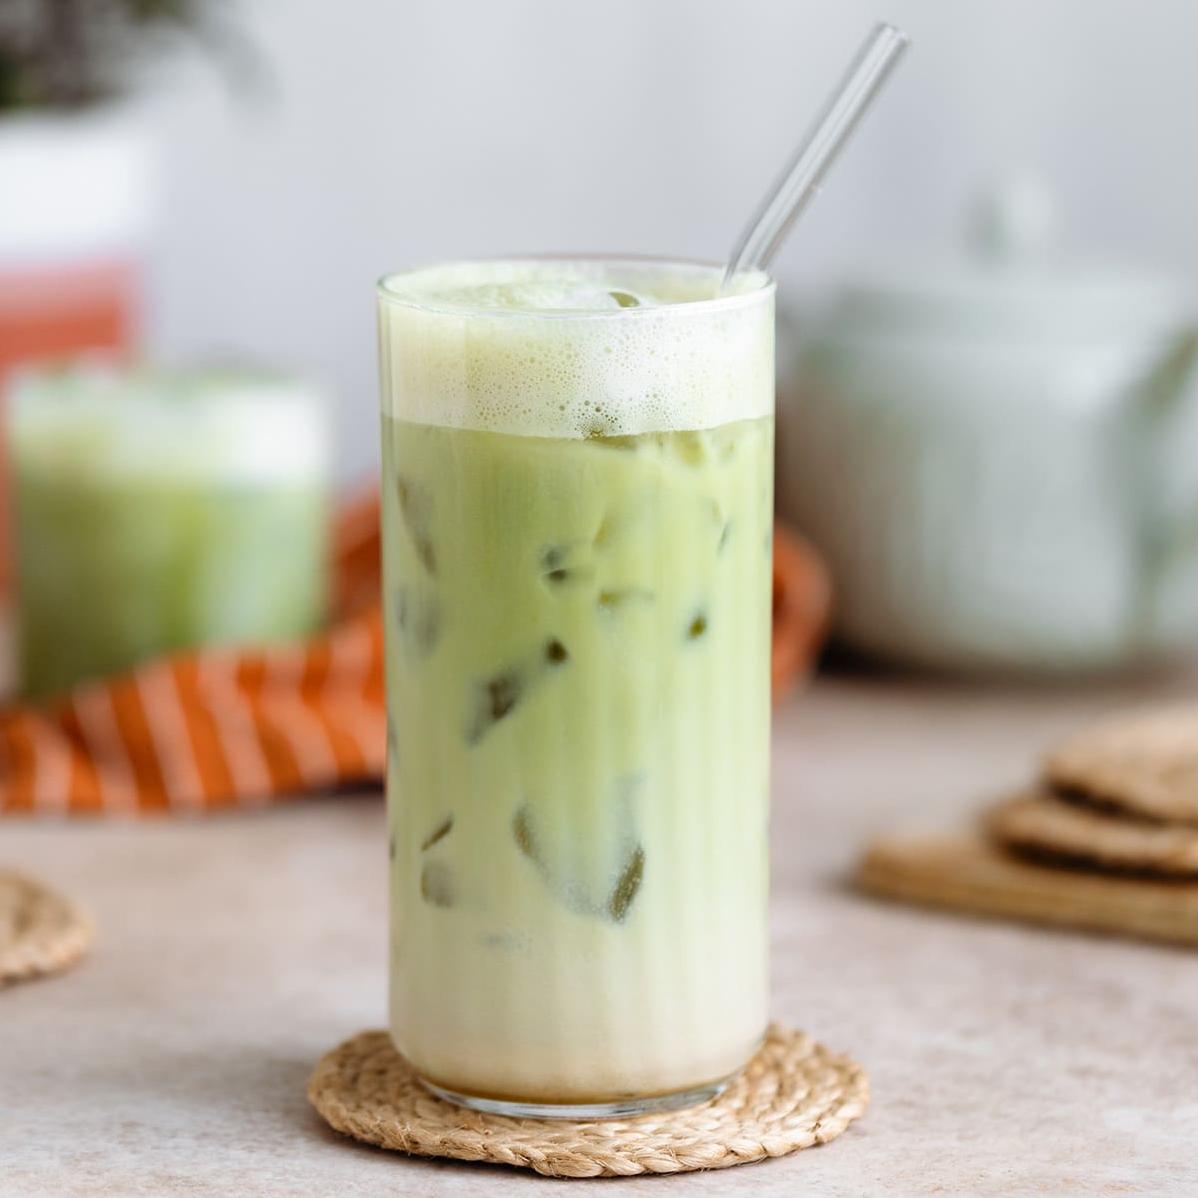  A creamy and delicious matcha chai latte to start your day off right!